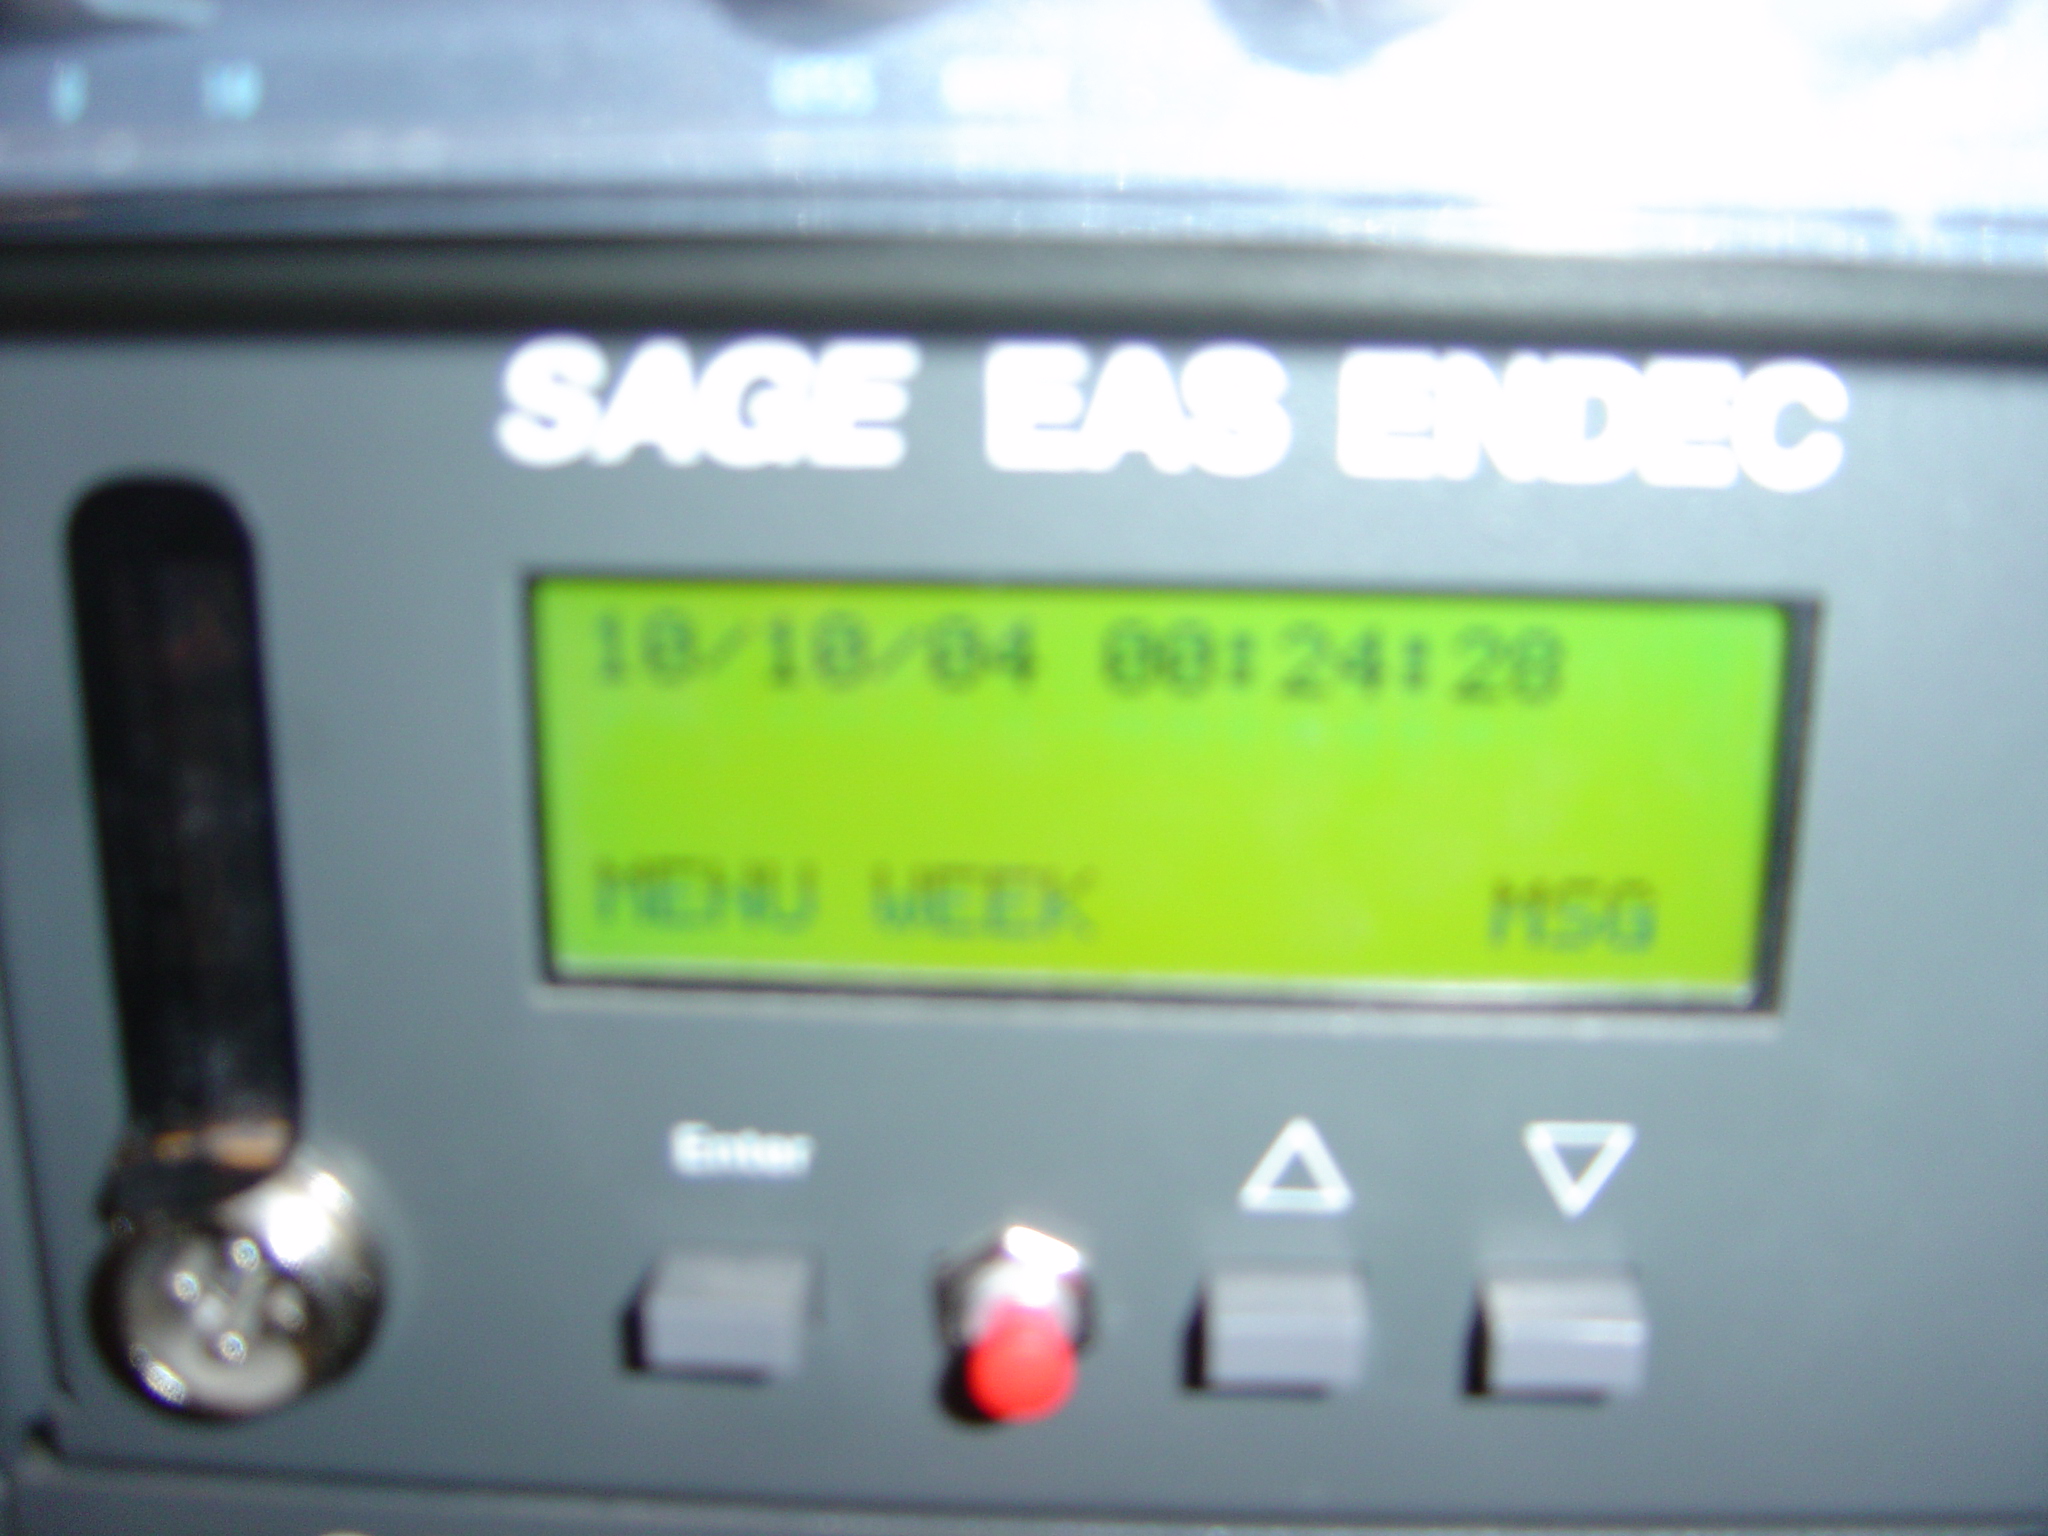 Fuzzy Images of the EAS Receiver